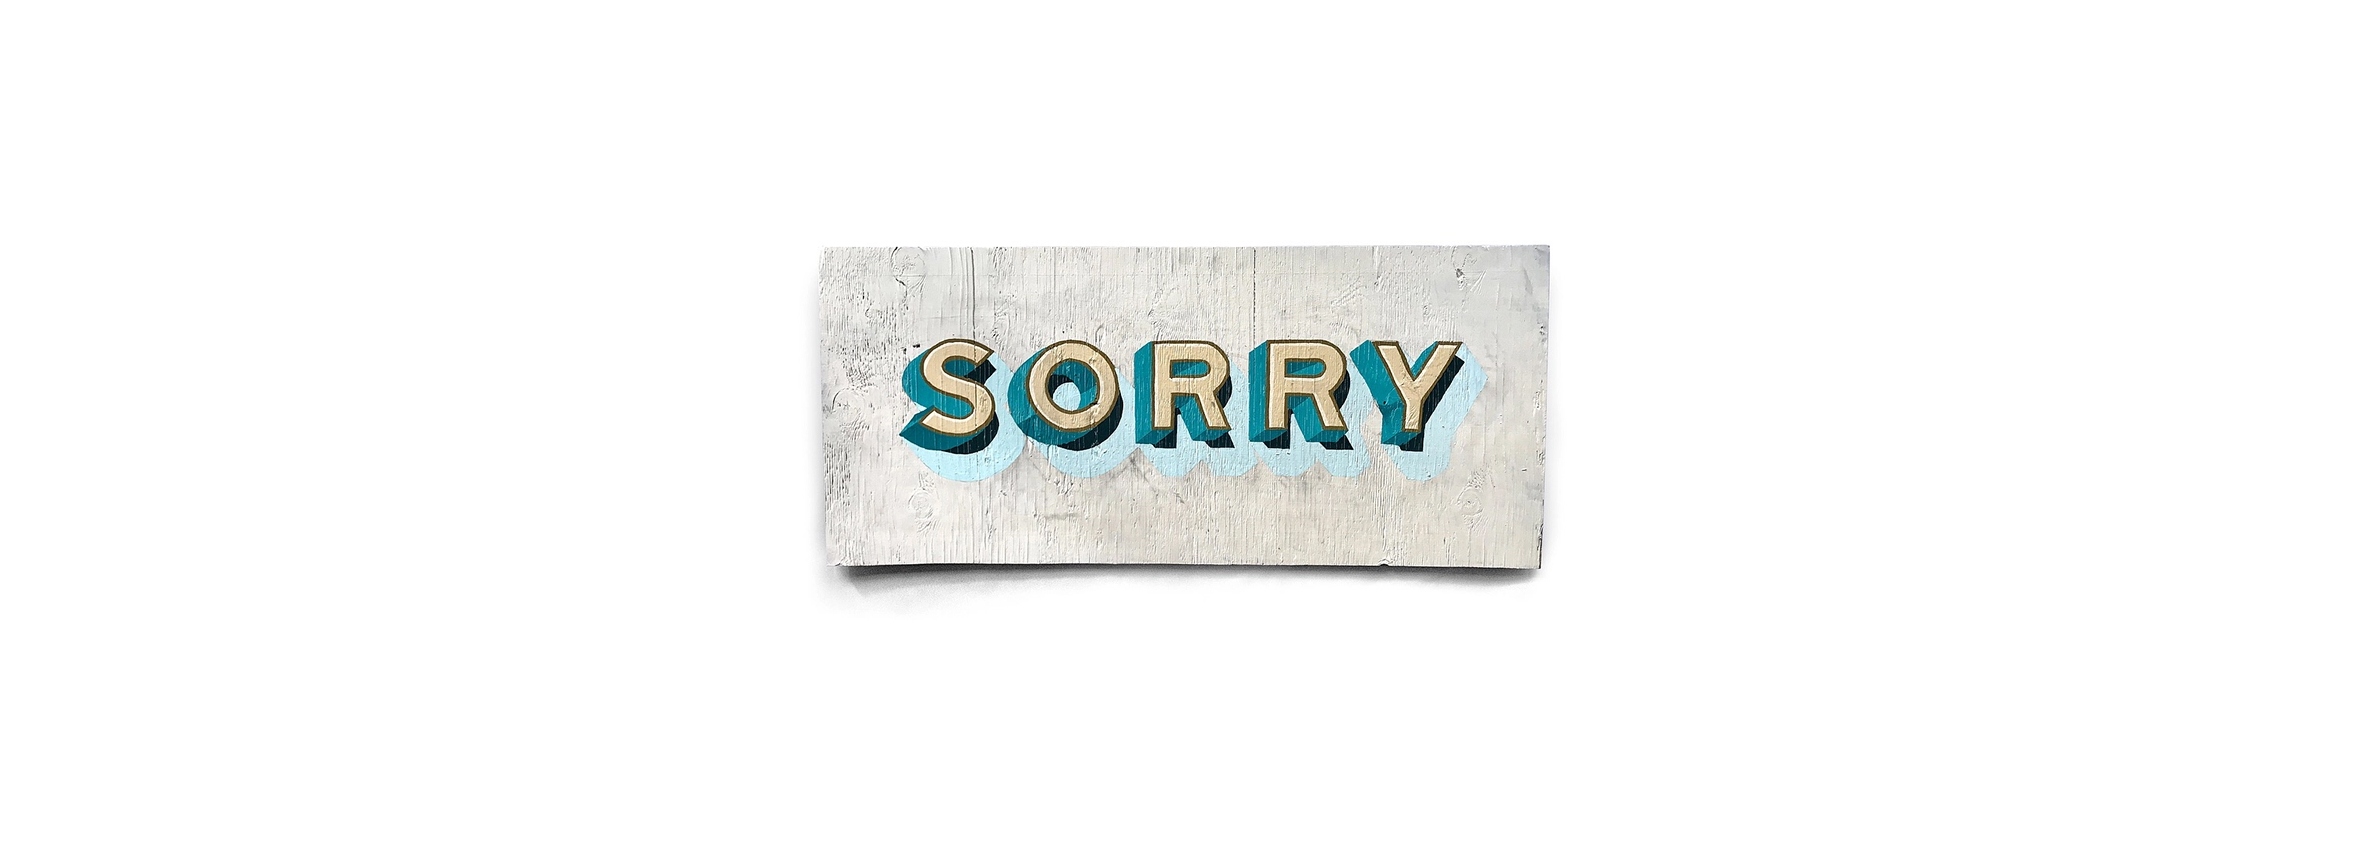 Sorry by Michael Moodie